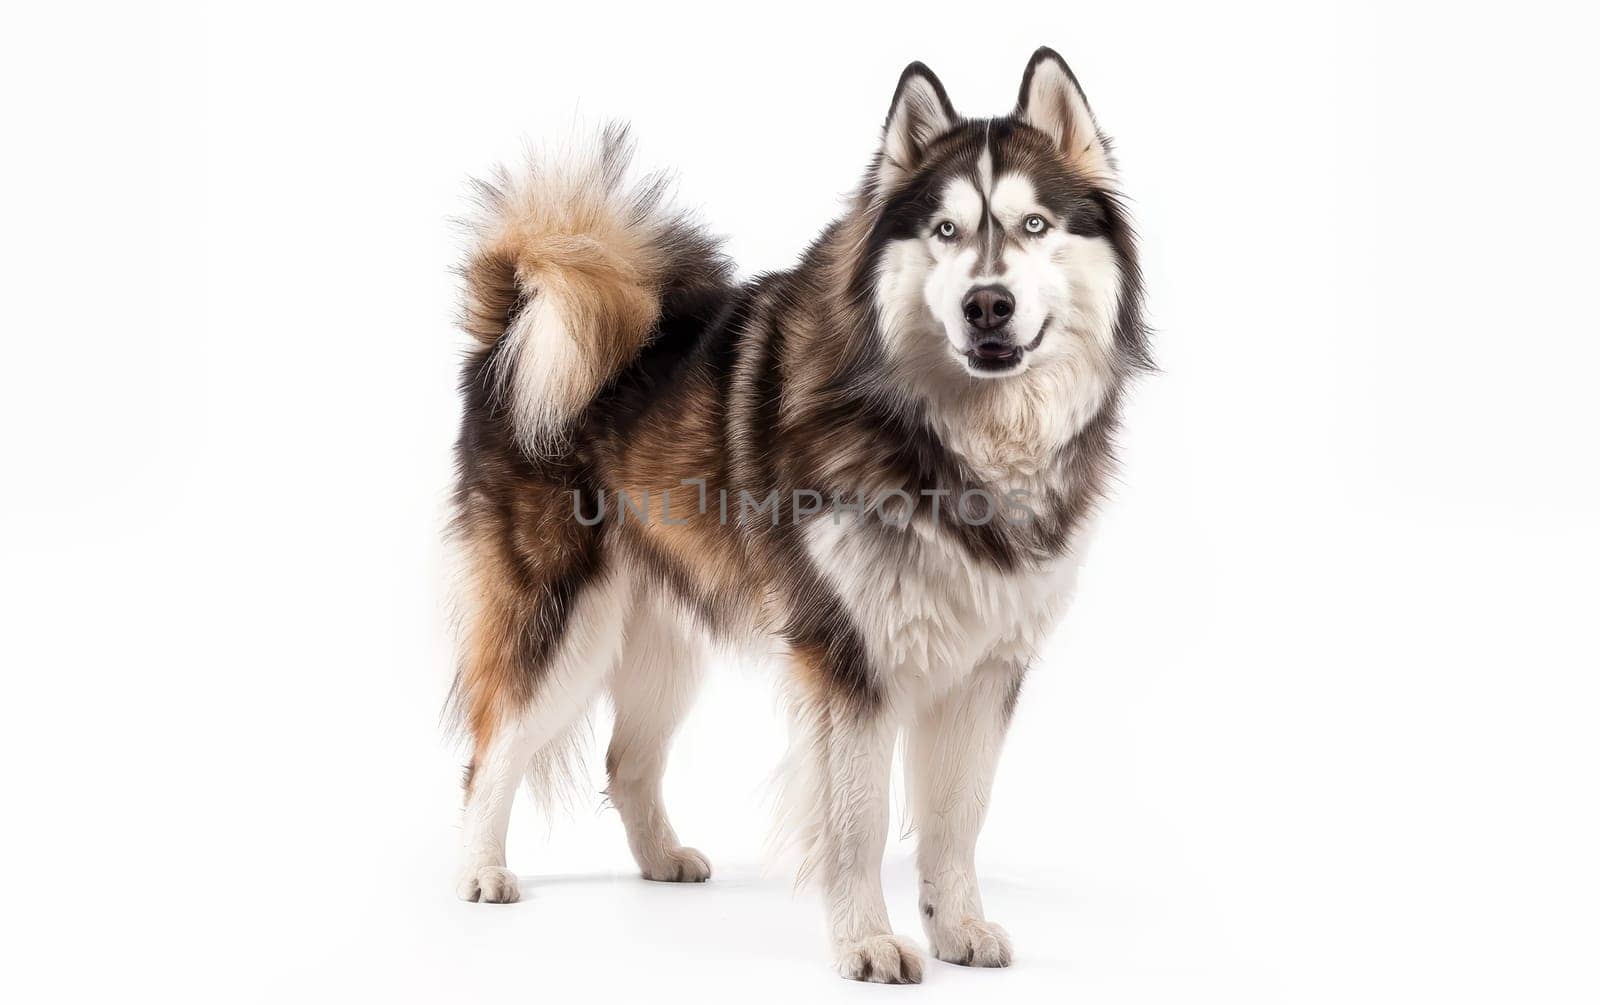 A proud Alaskan Malamute stands with a bold stance, its dense coat and alert expression reflecting the breed's resilience and dignity. This dog embodies the spirit of the great northern wilderness. by sfinks